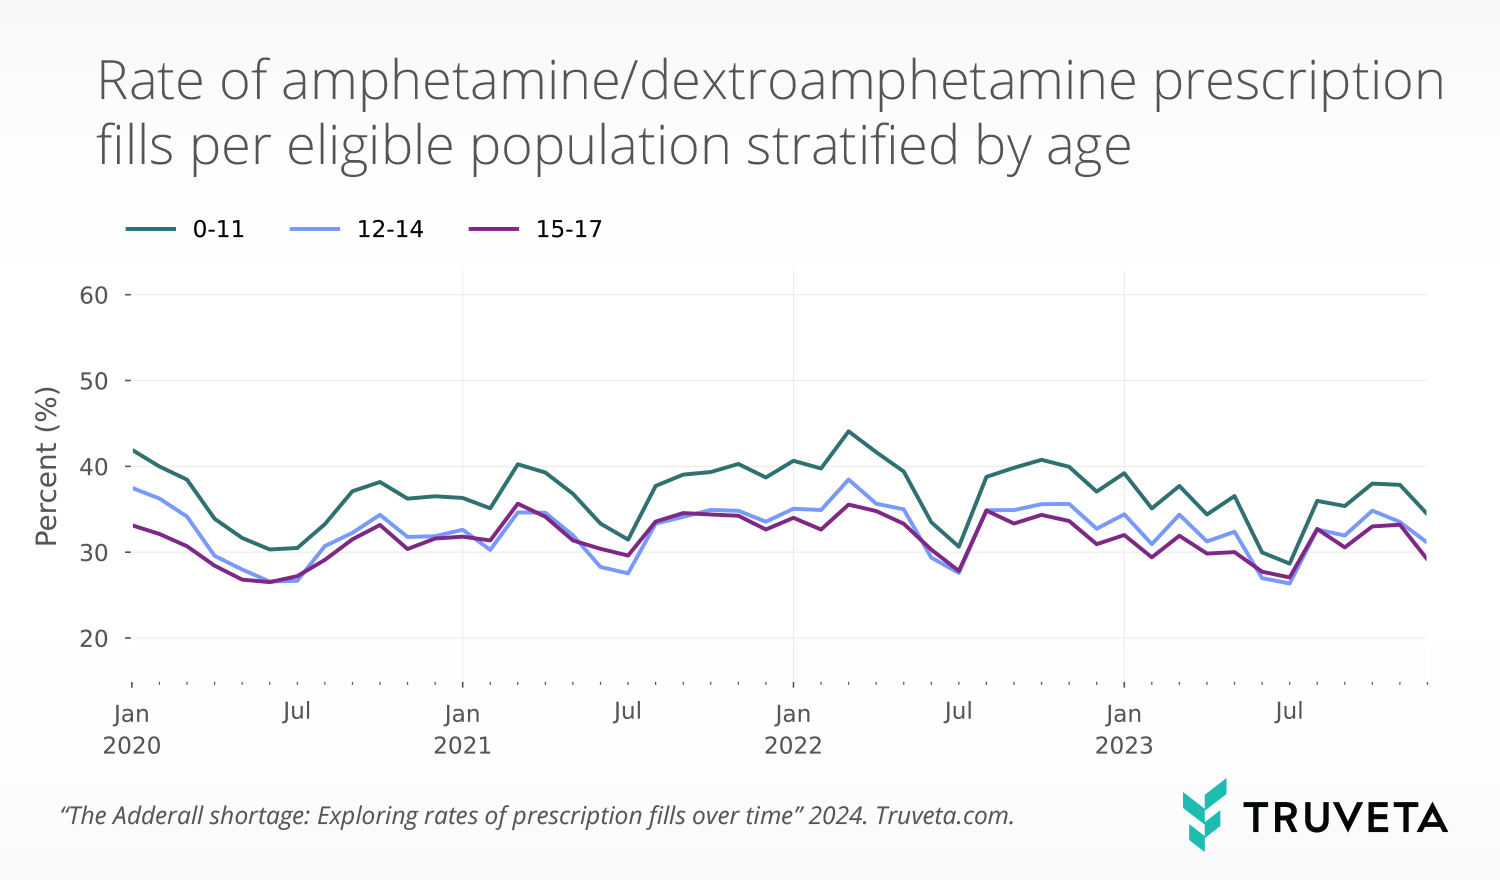 Truveta Research explores the potential impact of Adderall shortage using EHR data to explore trends in prescription fills for patients with ADHD